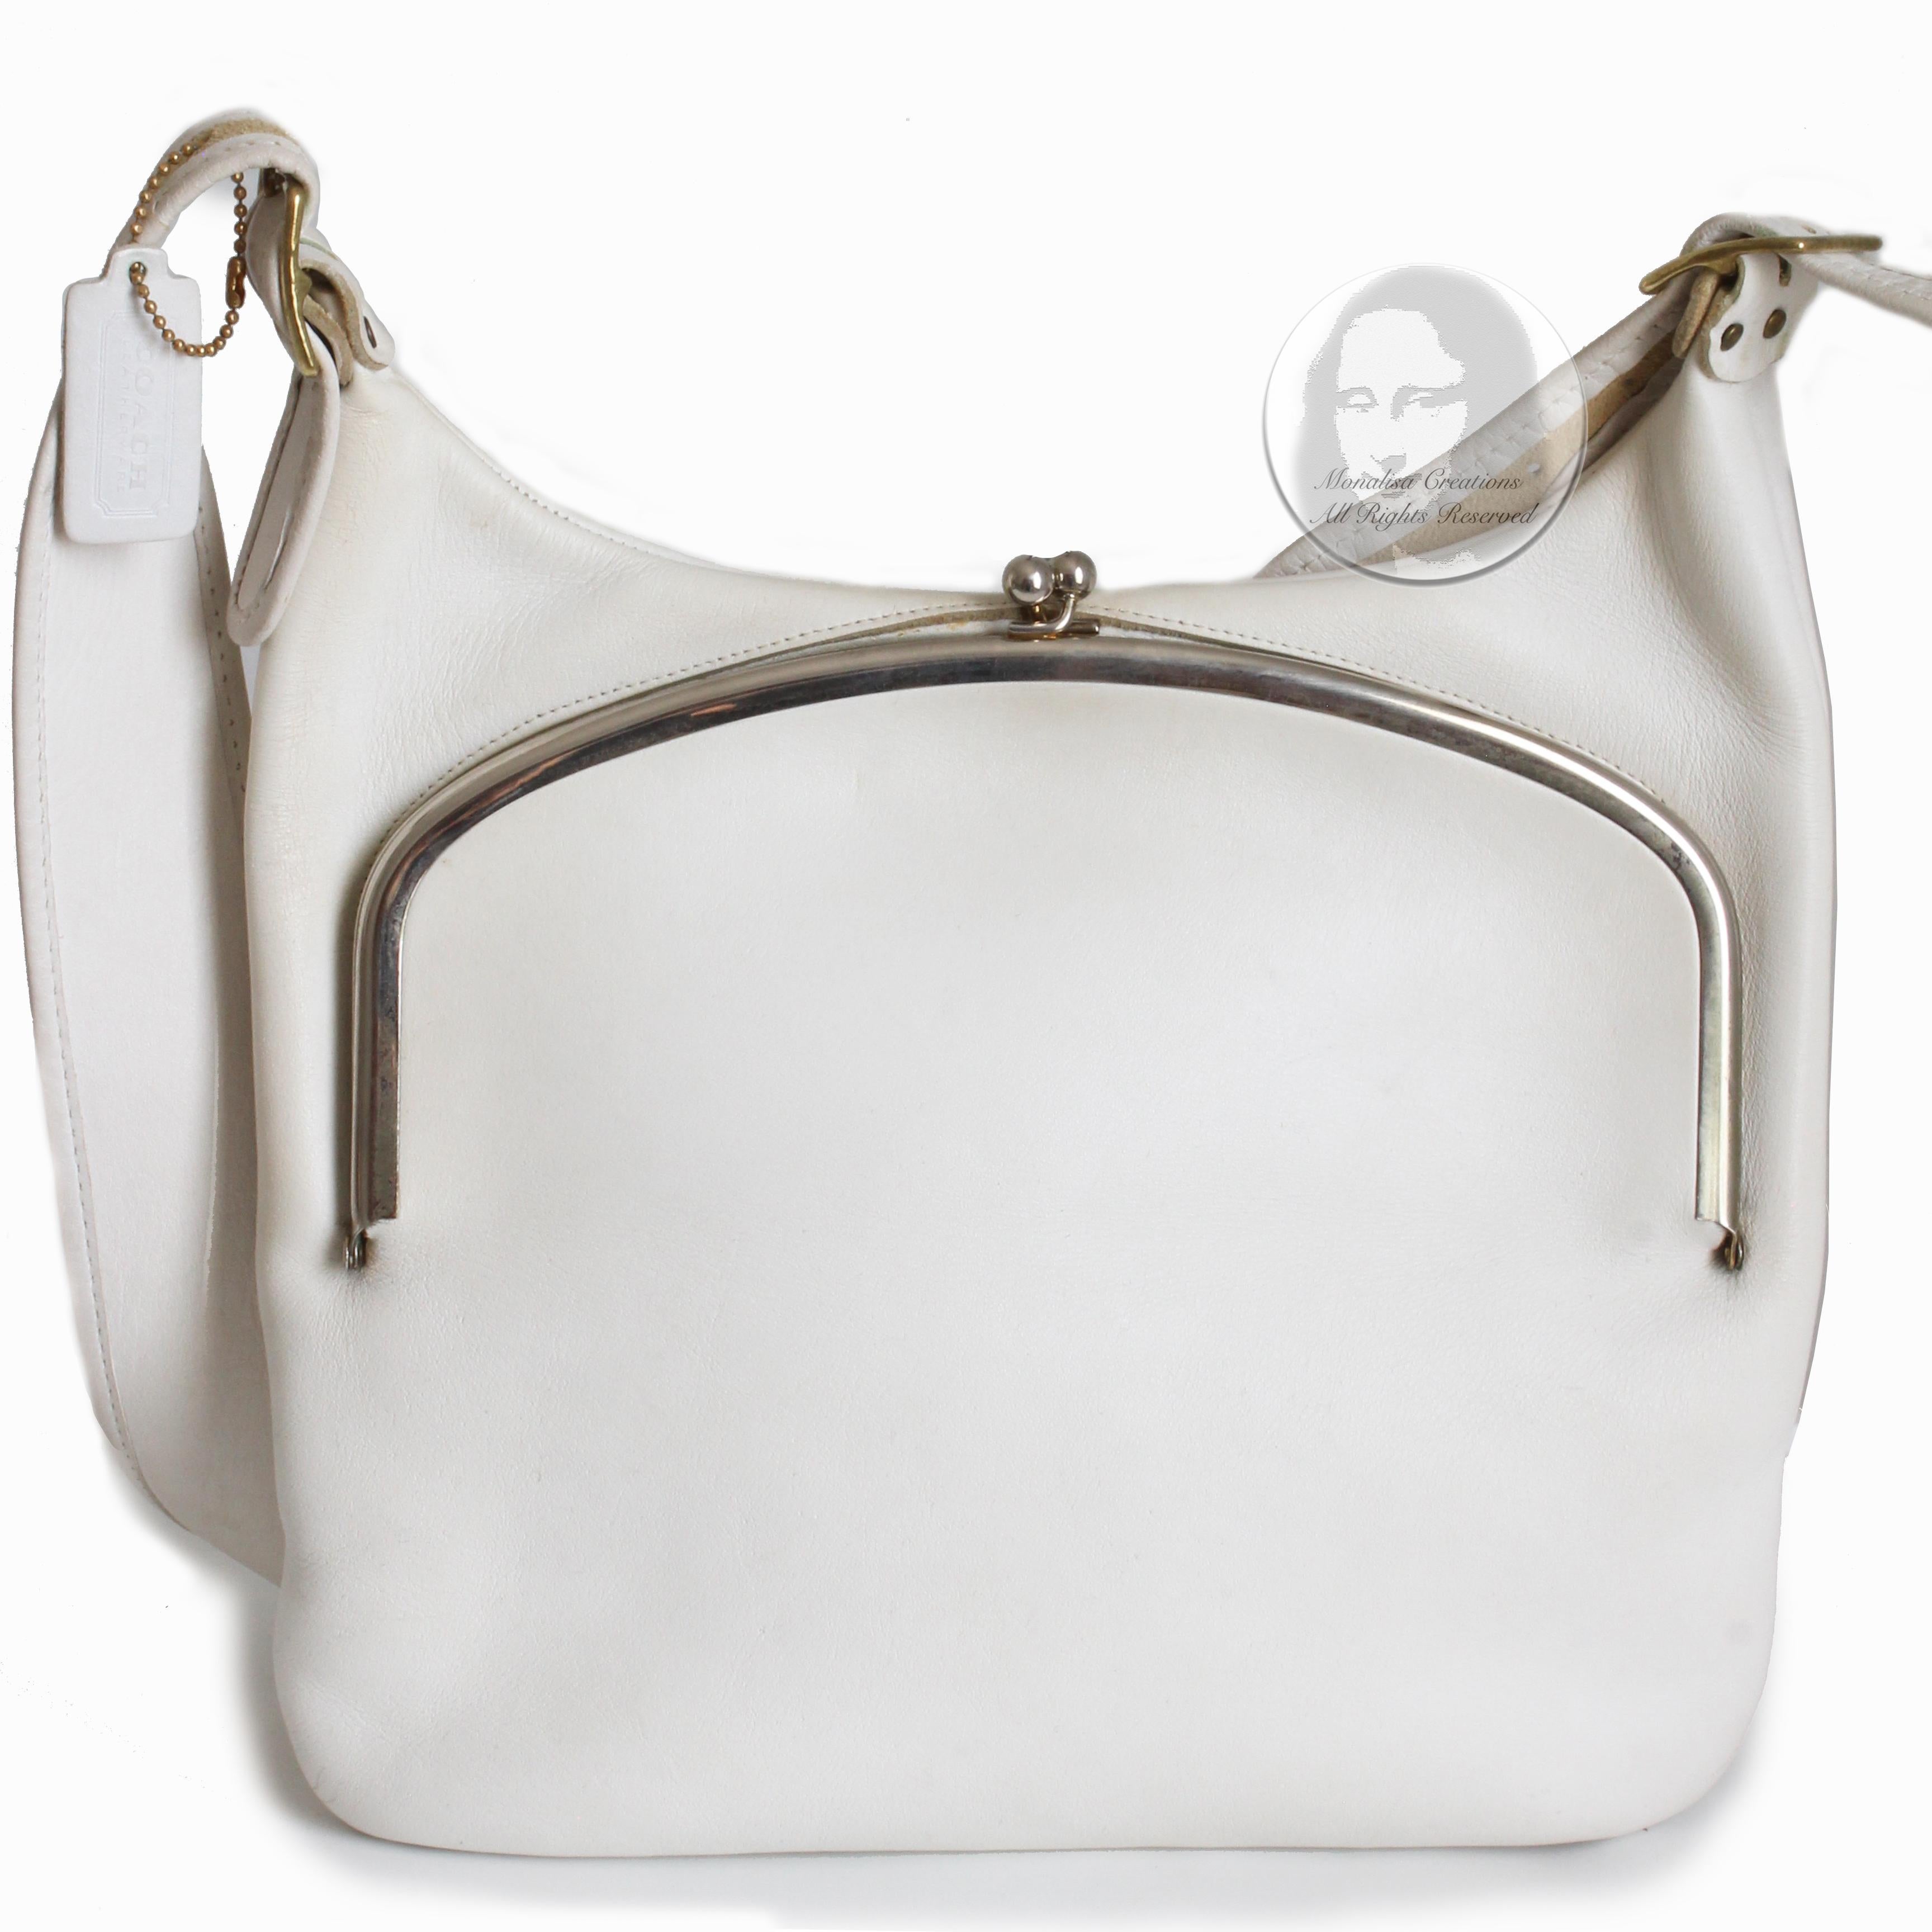 Bonnie Cashin for Coach Frame Bag Rare White Leather with Hang Tag Vintage 70s 3